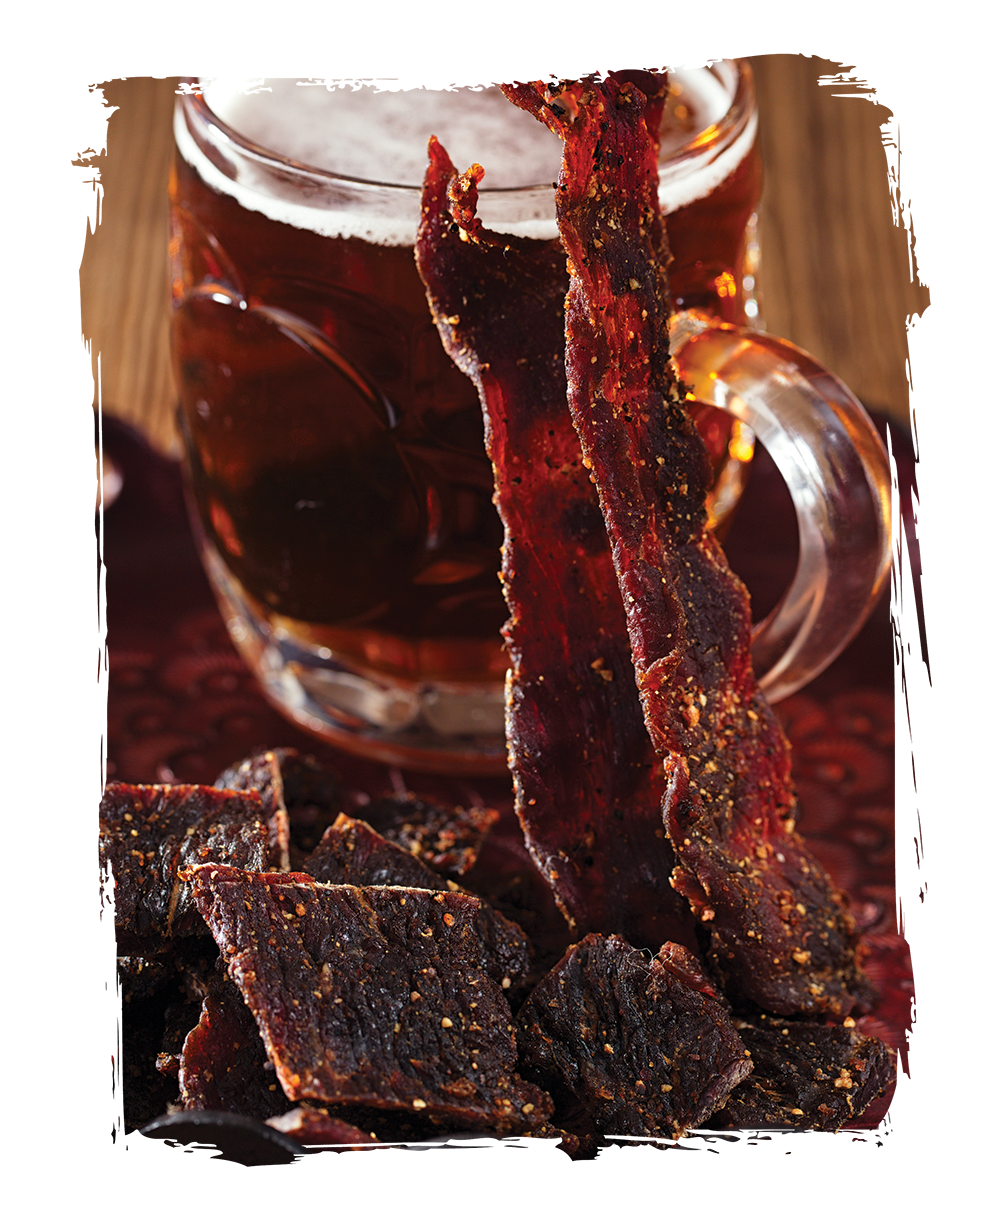 Beef Jerky and Biltong Producer in Crawley and Horsham beer jug with beef jerky and biltong